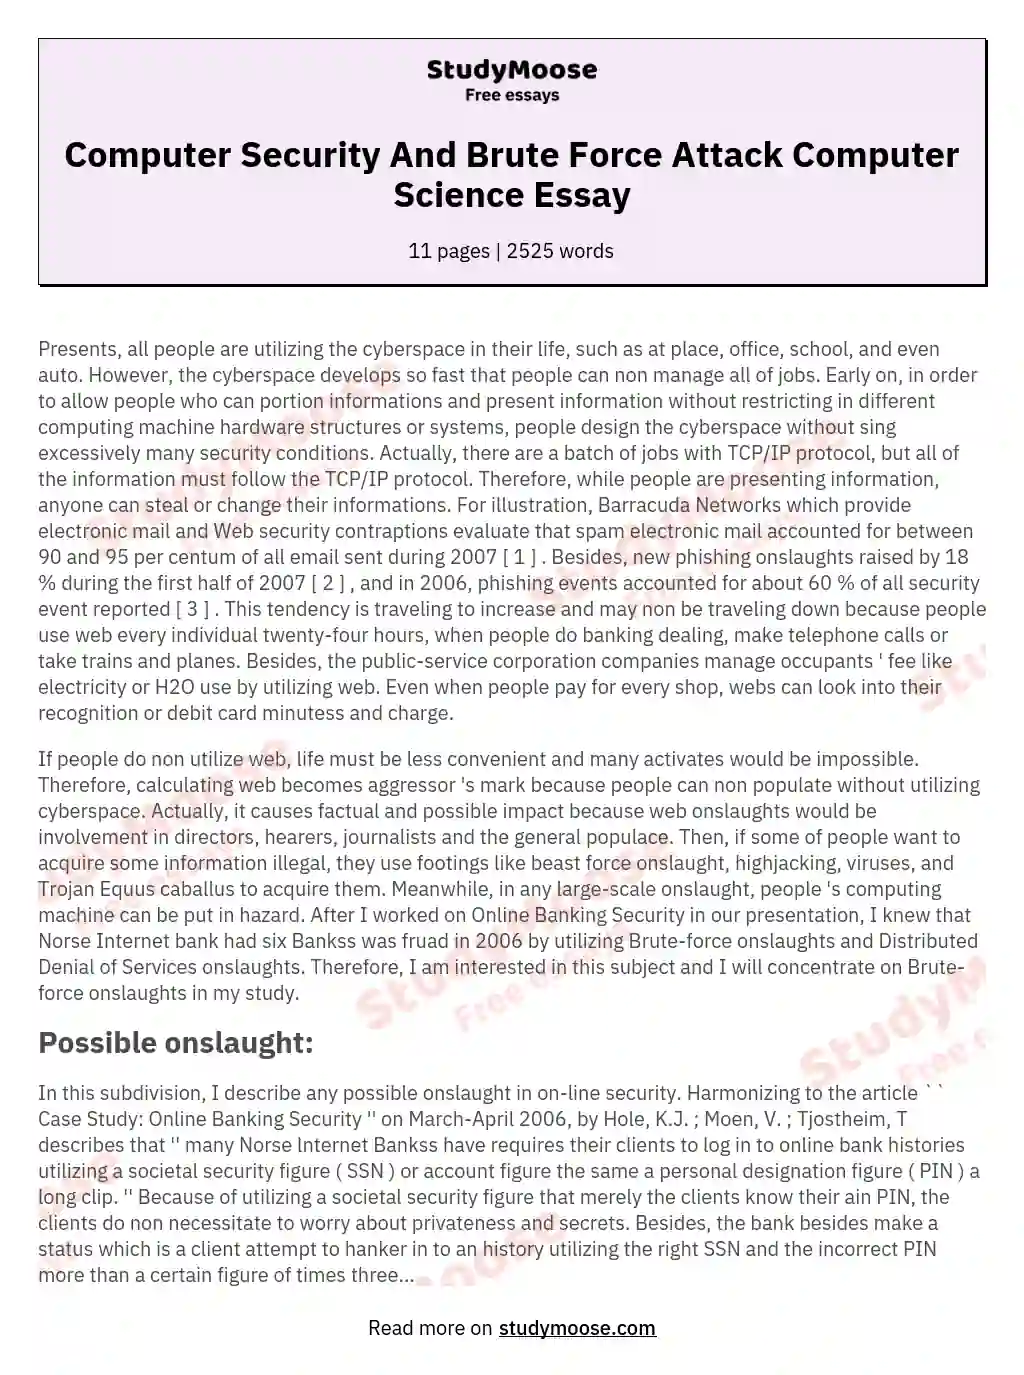 Computer Security And Brute Force Attack Computer Science Essay